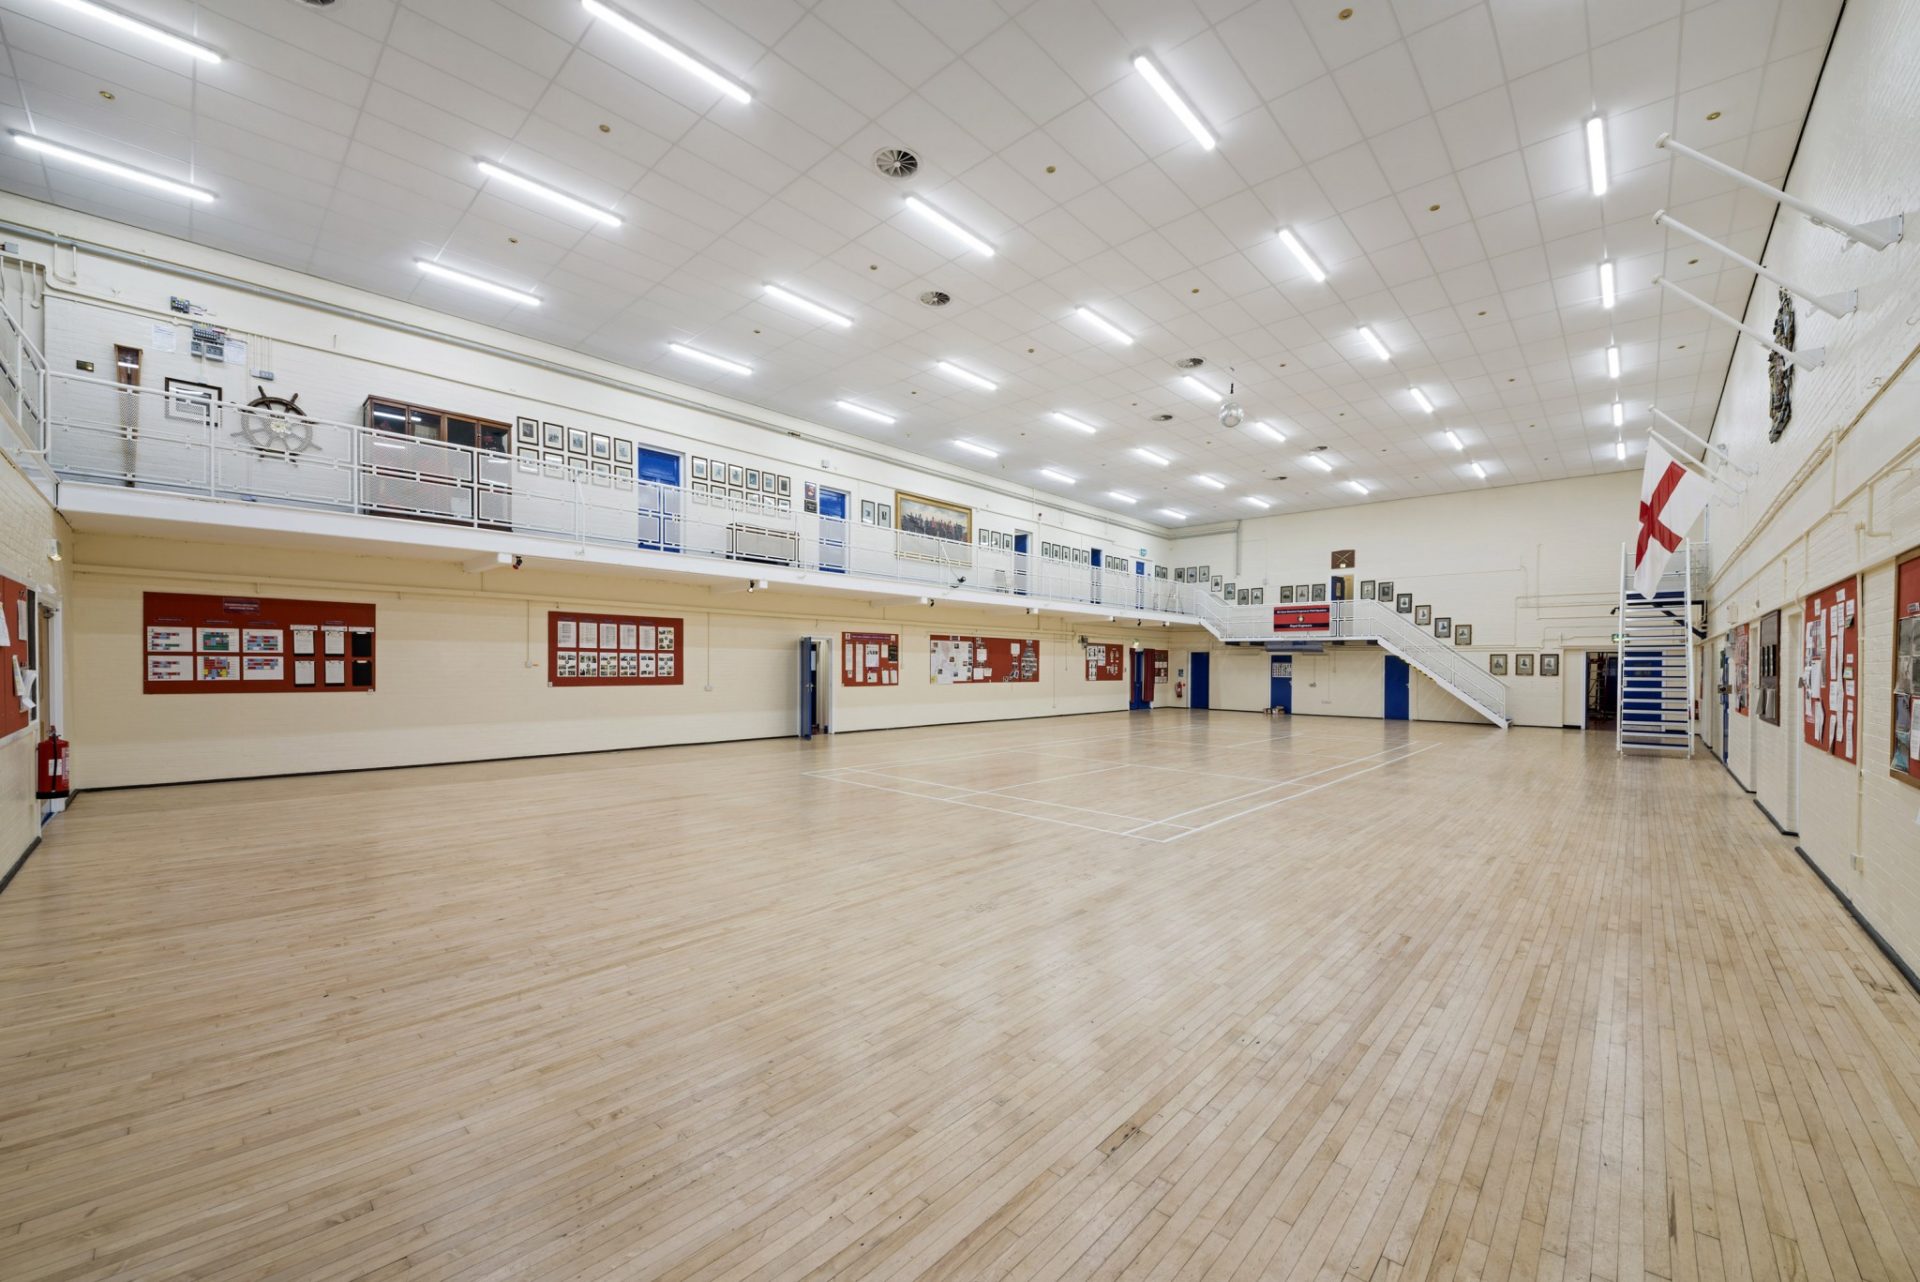 Rockfon acoustic ceiling solutions form part of Army Reserve refurbishment